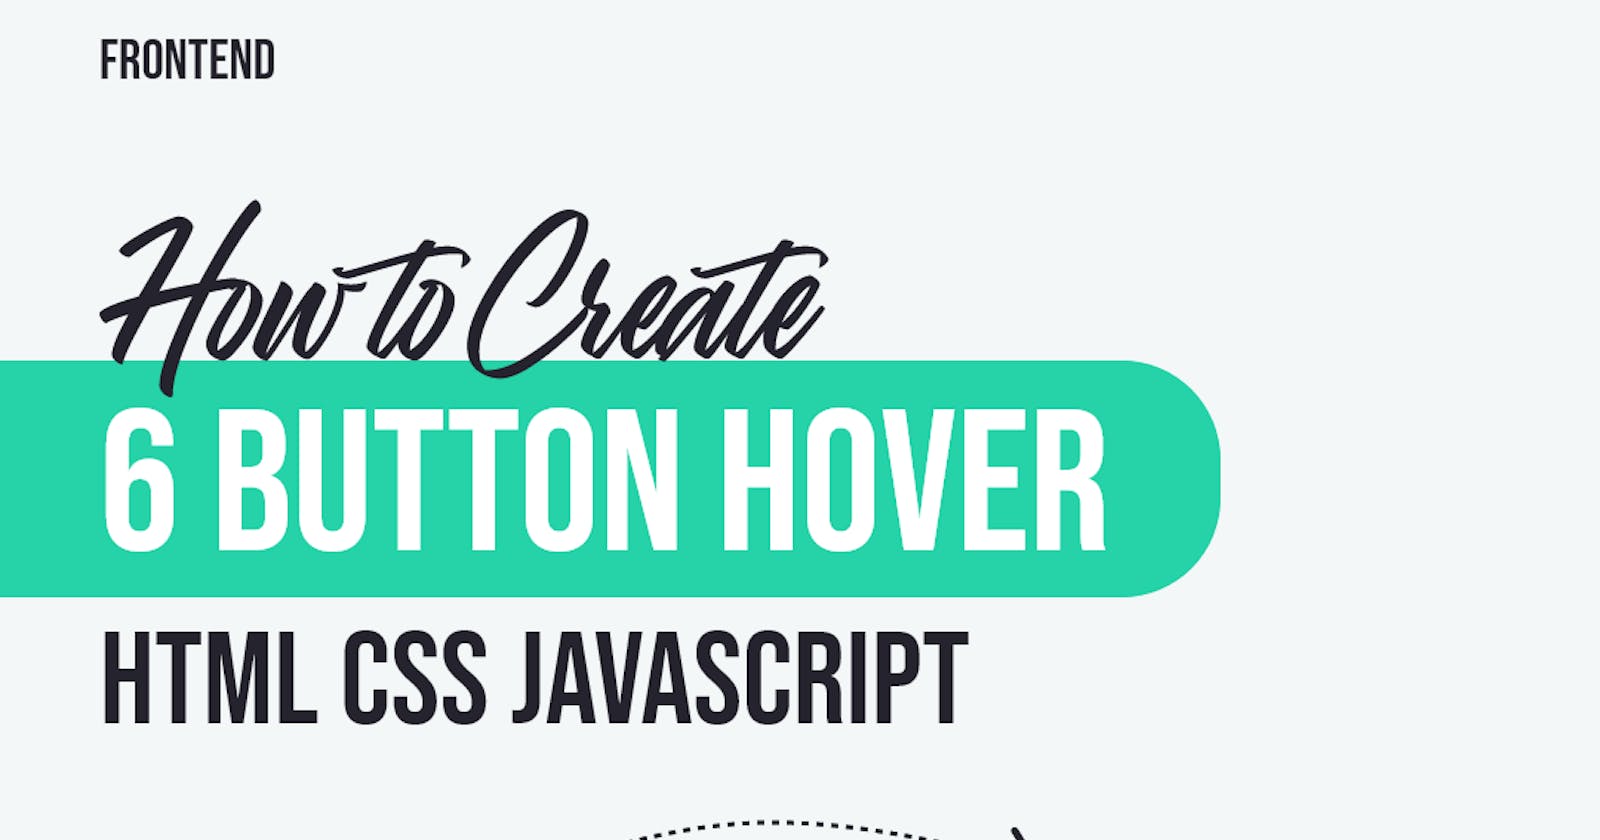 How to create 6 hover effects to buttons (frontend)